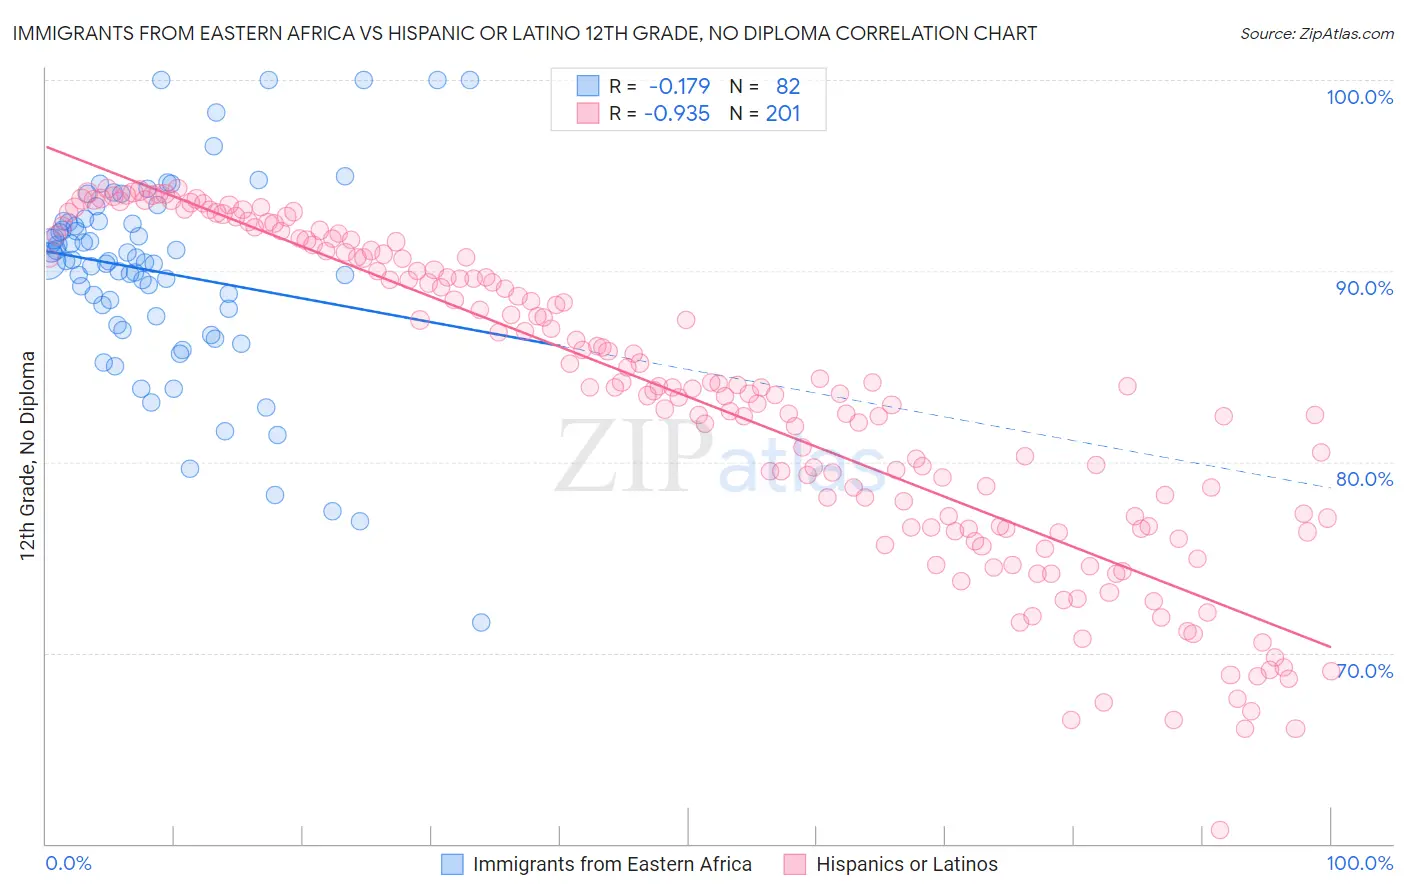 Immigrants from Eastern Africa vs Hispanic or Latino 12th Grade, No Diploma